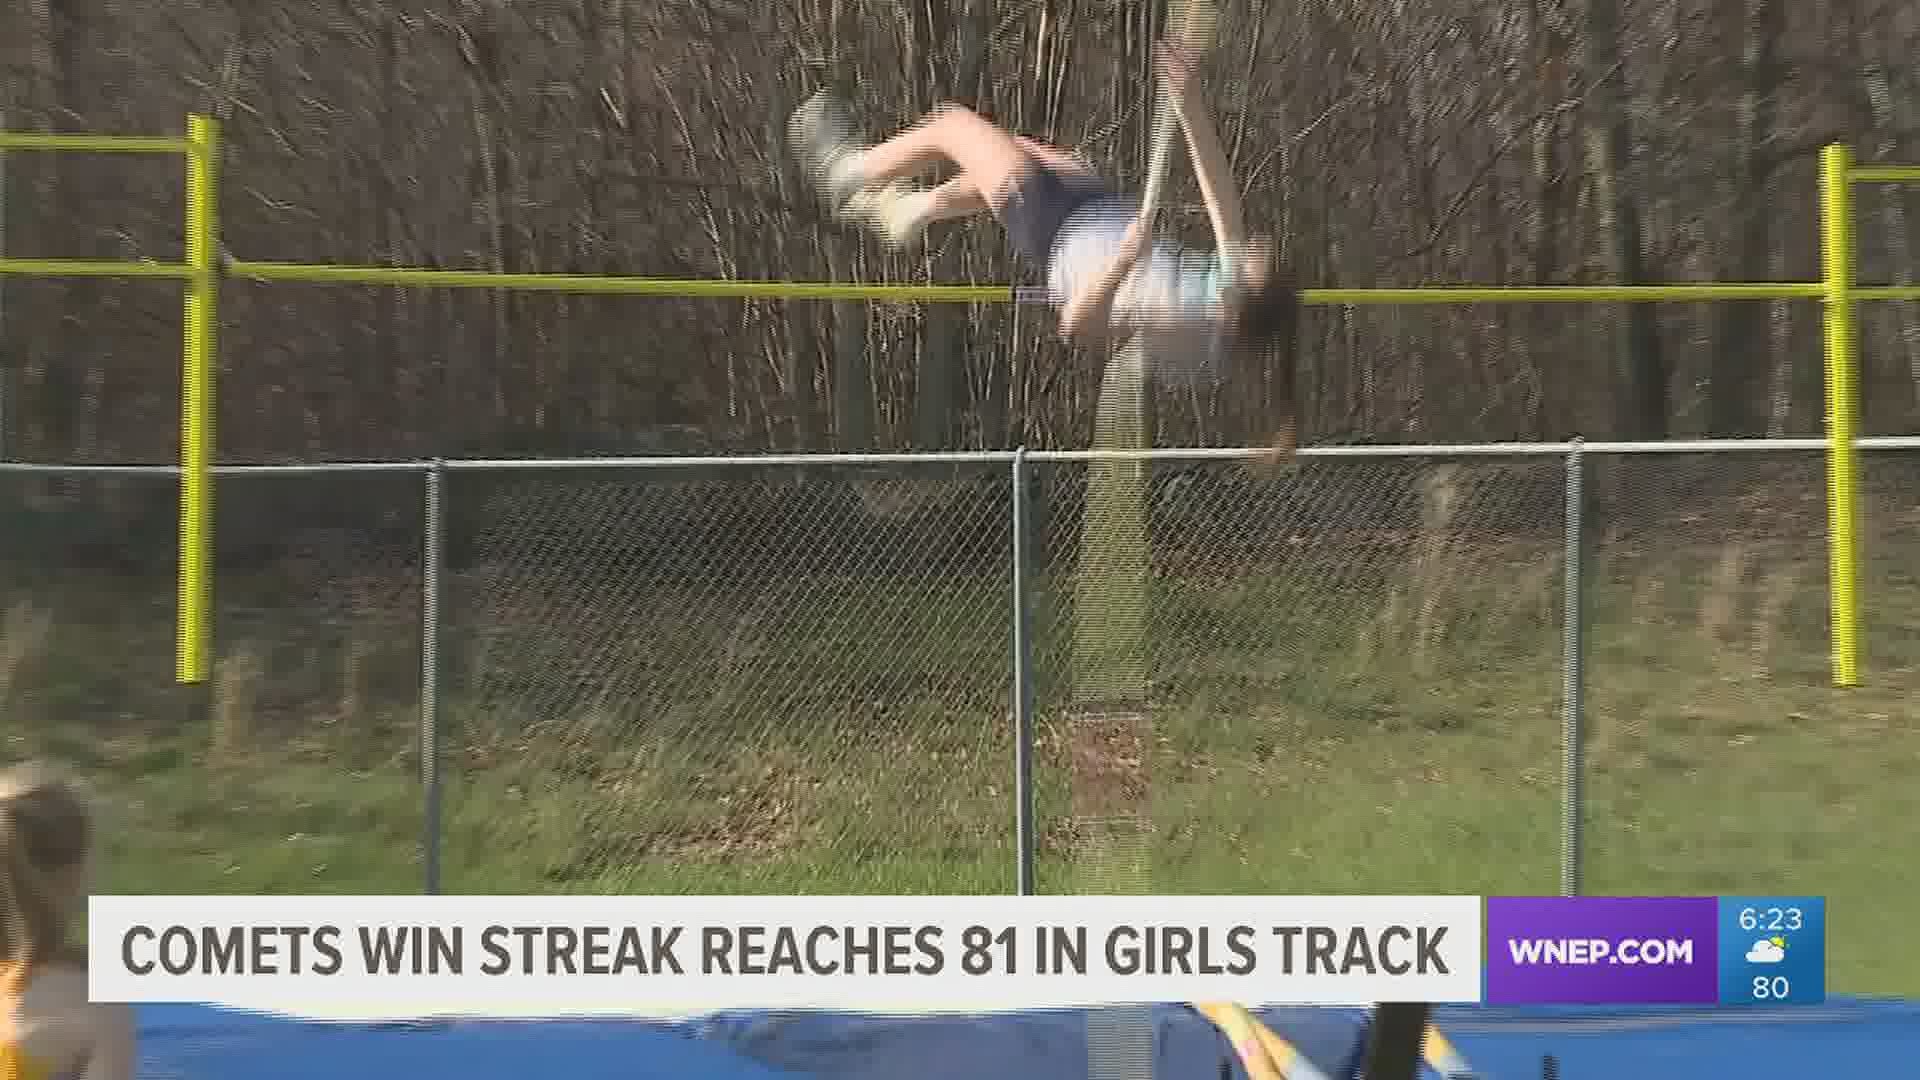 Abington Heights Win Streak Reaches 81 Straight in Girls Track and Field